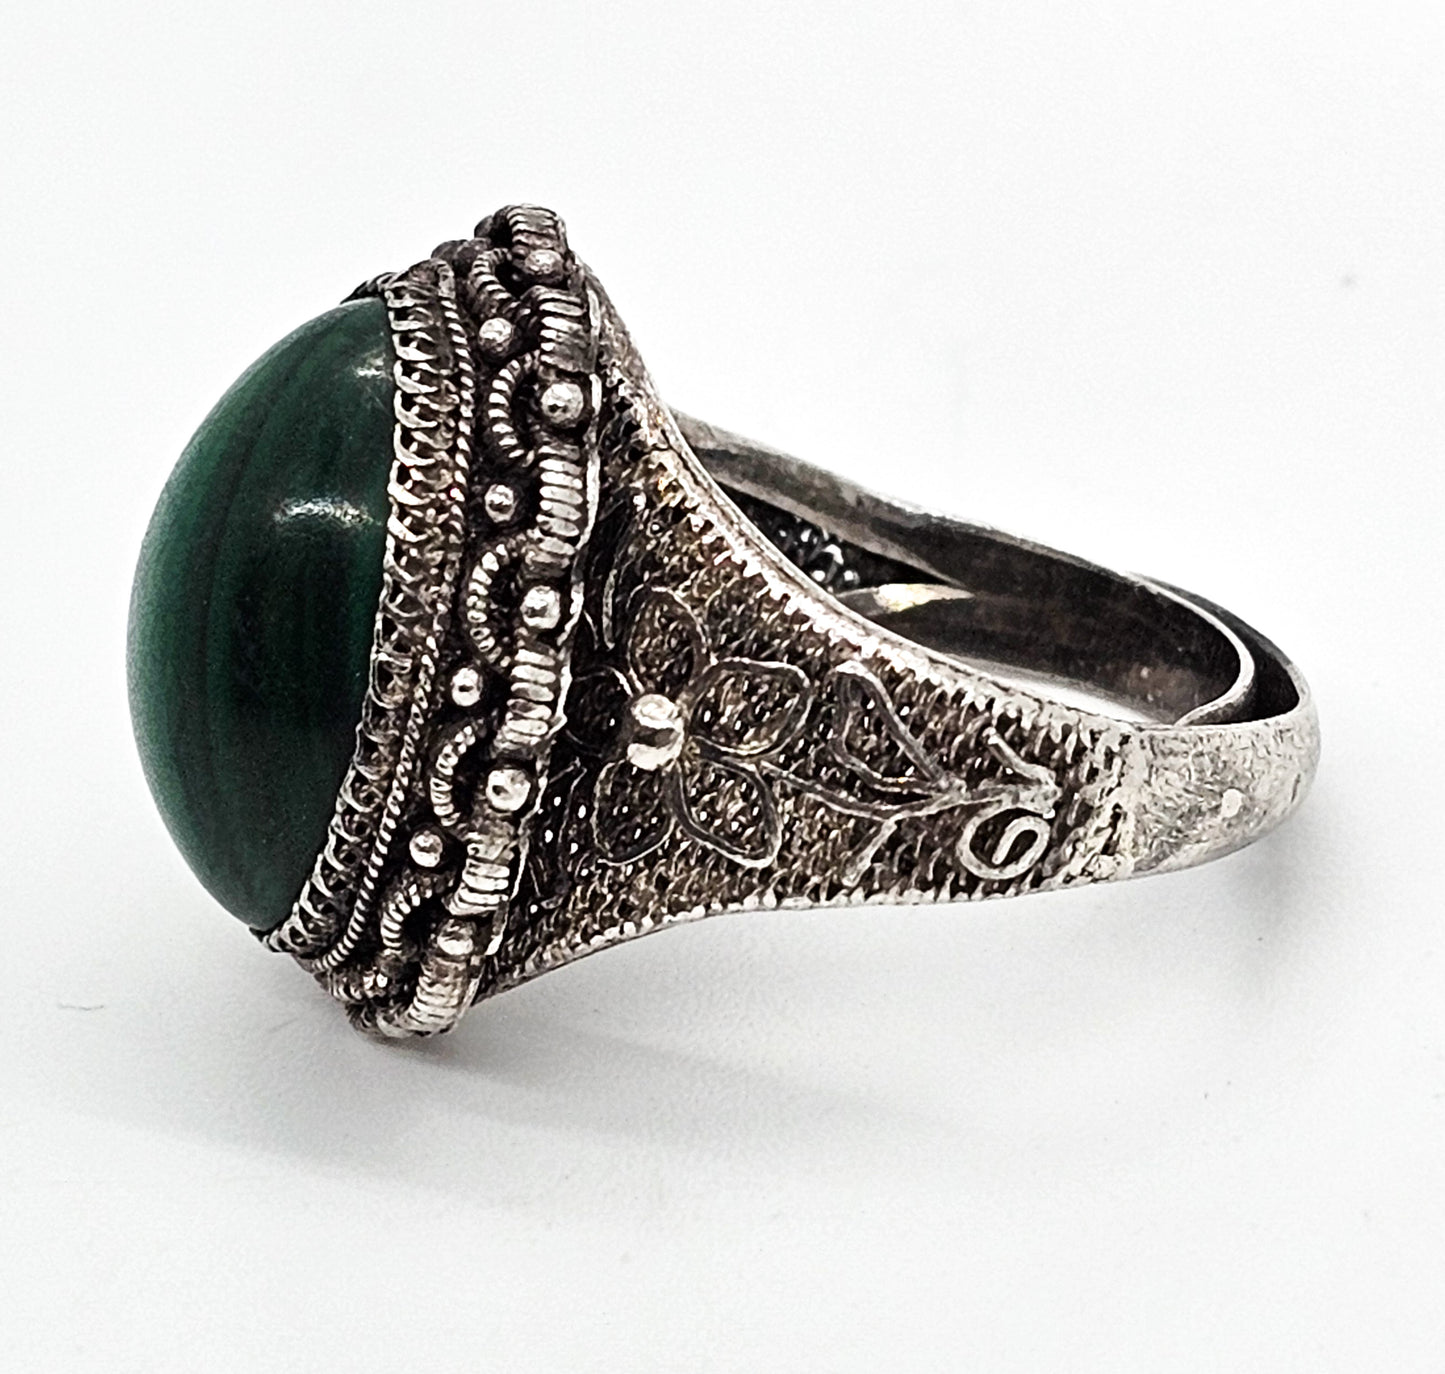 Chinese Export Malachite green gemstone filigree vintage sterling silver ring size 7